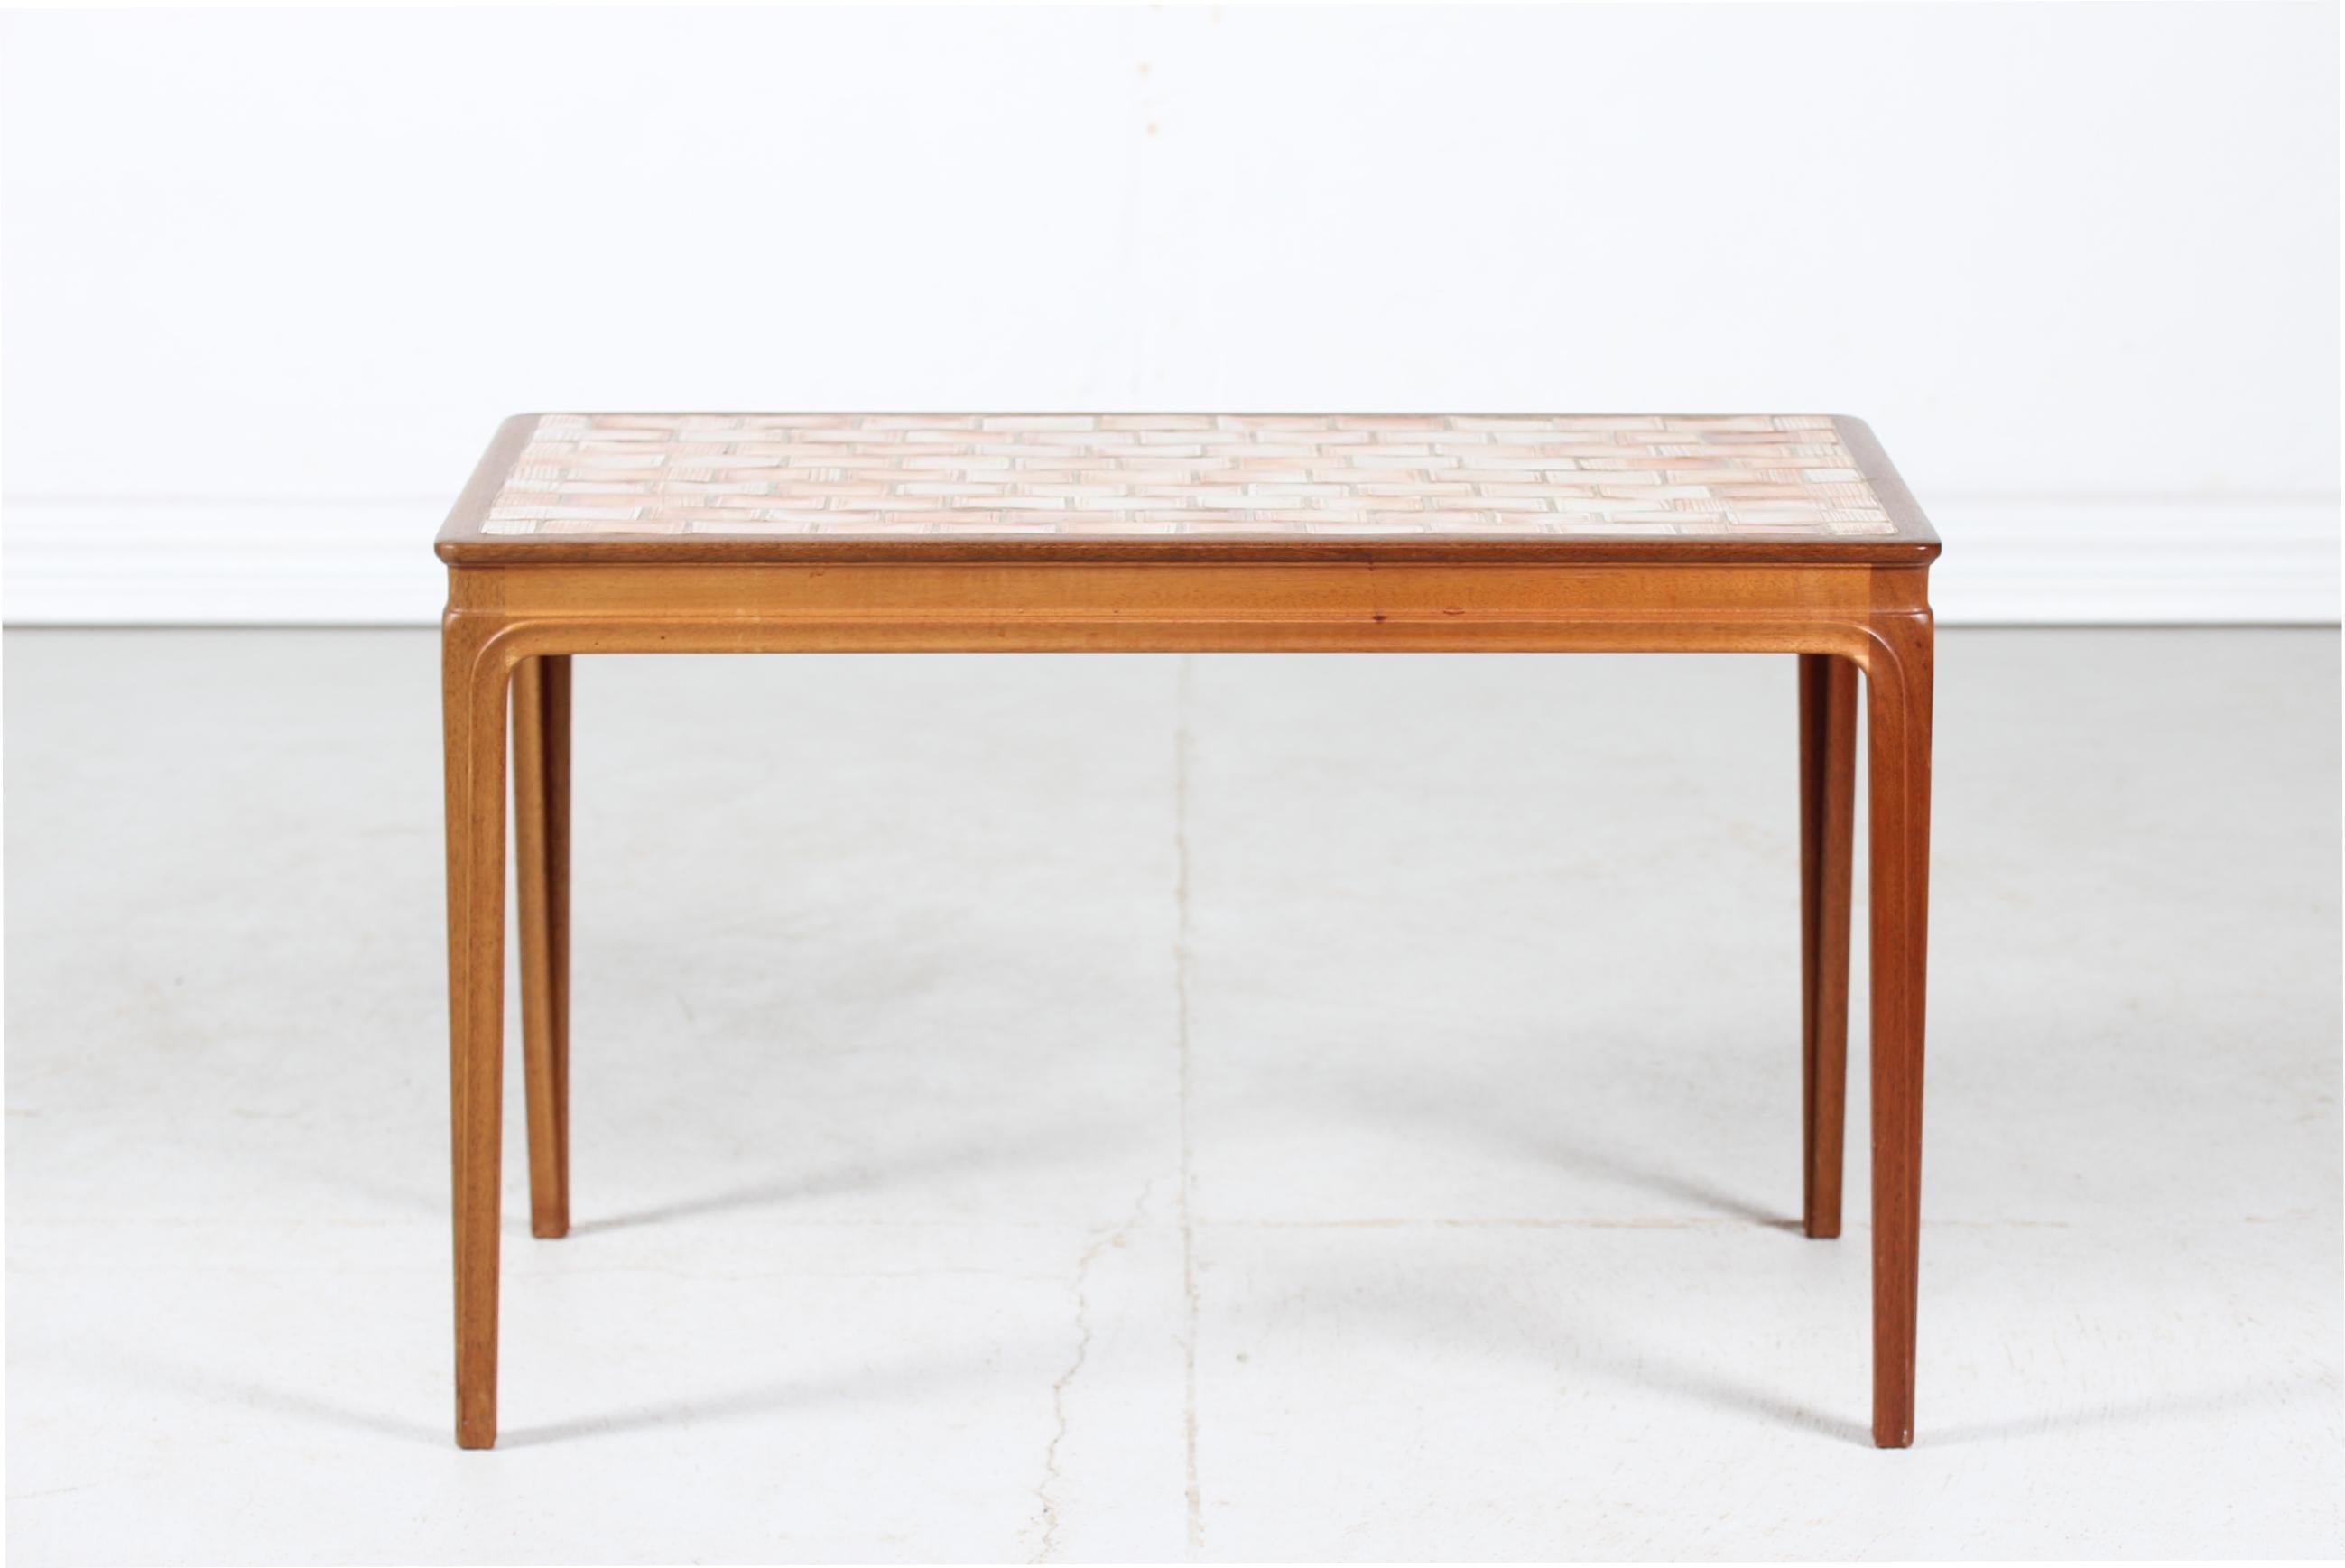 1950s Danish mid-century coffee table made of mahogany with inlaid ceramic tiles in orange-brown colors.
The table is oil treated and manufactured in the 1950´s at cabinet-maker Christian Rasmussen furniture in Randers Denmark.

Nice vintage